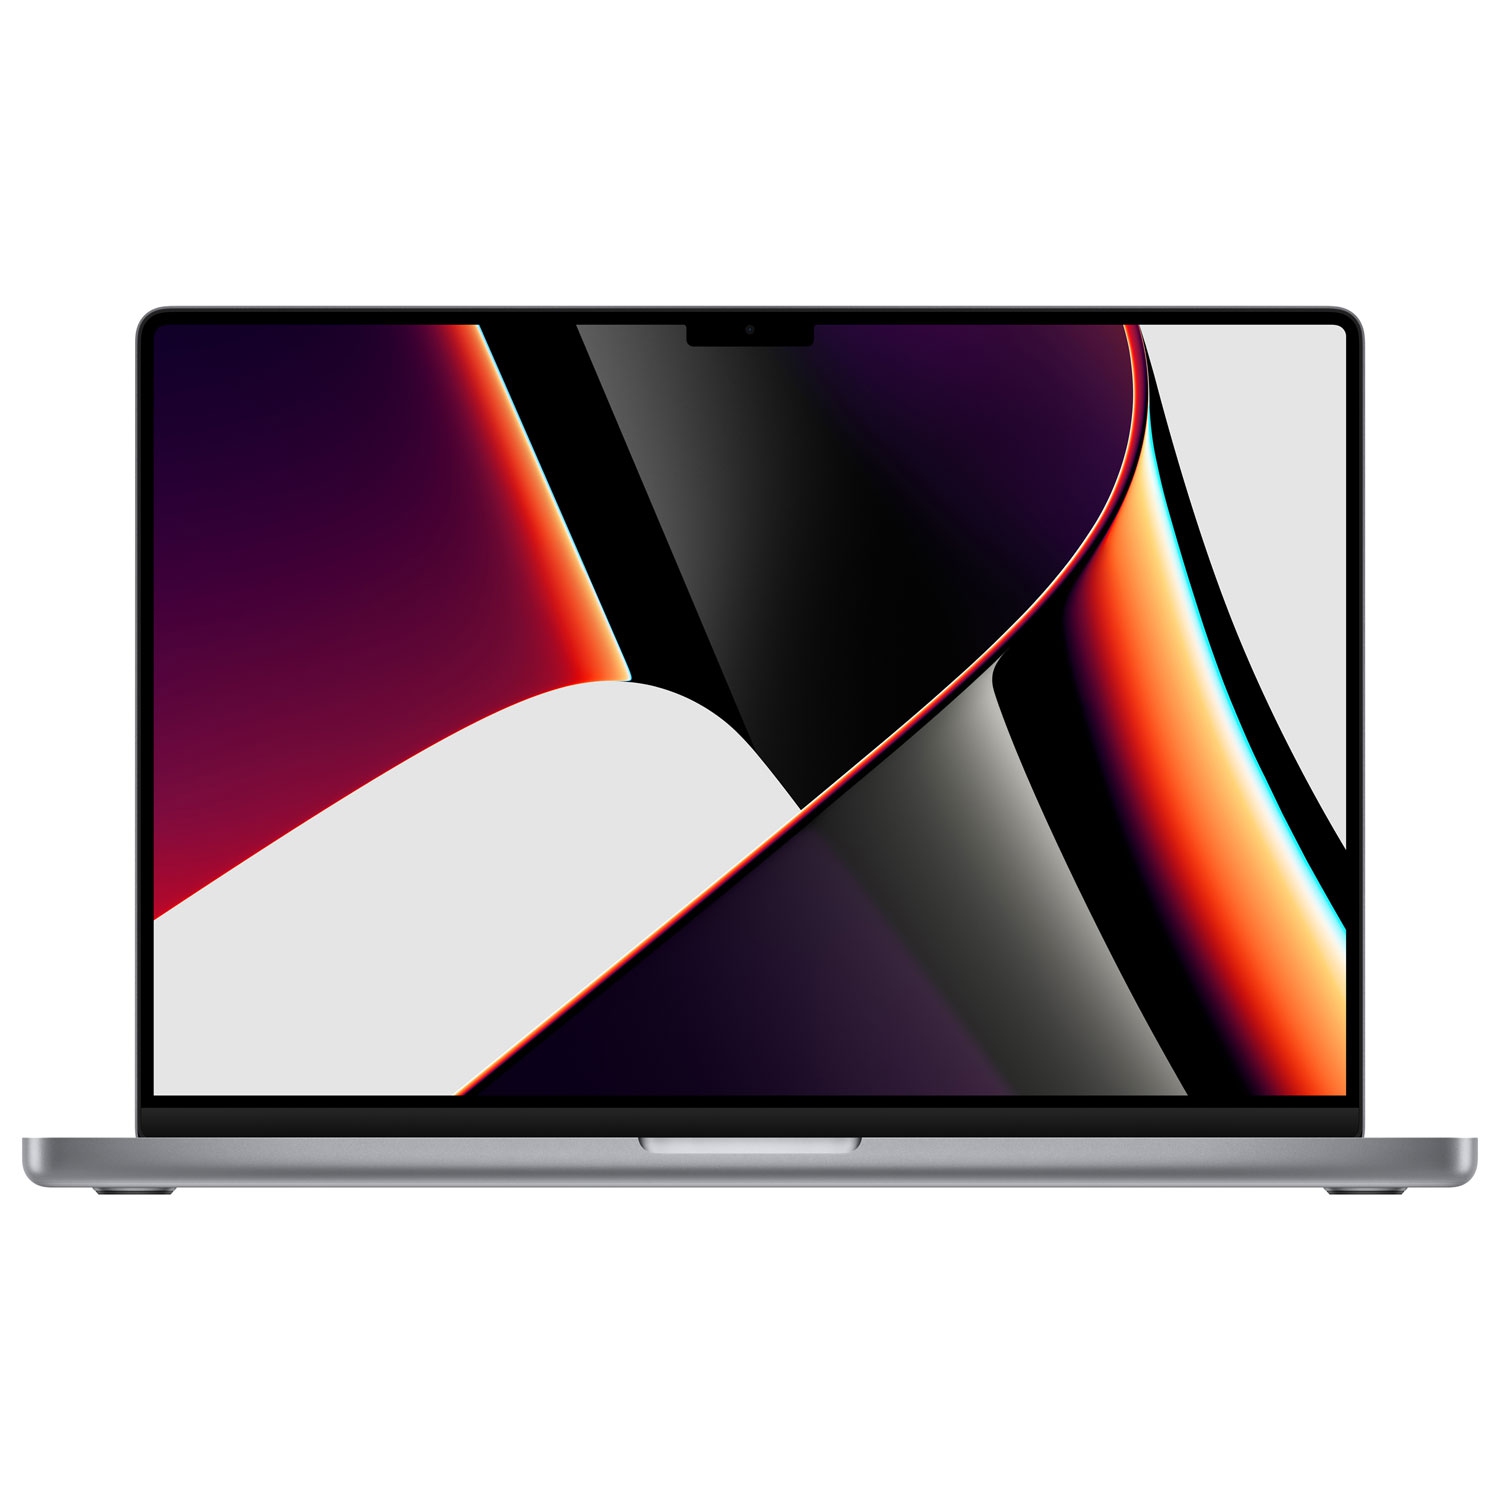 Refurbished (Excellent) - Apple MacBook Pro 16" (2021) - Space Grey (Apple M1 Max Chip / 2TB SSD / 64GB RAM) - English